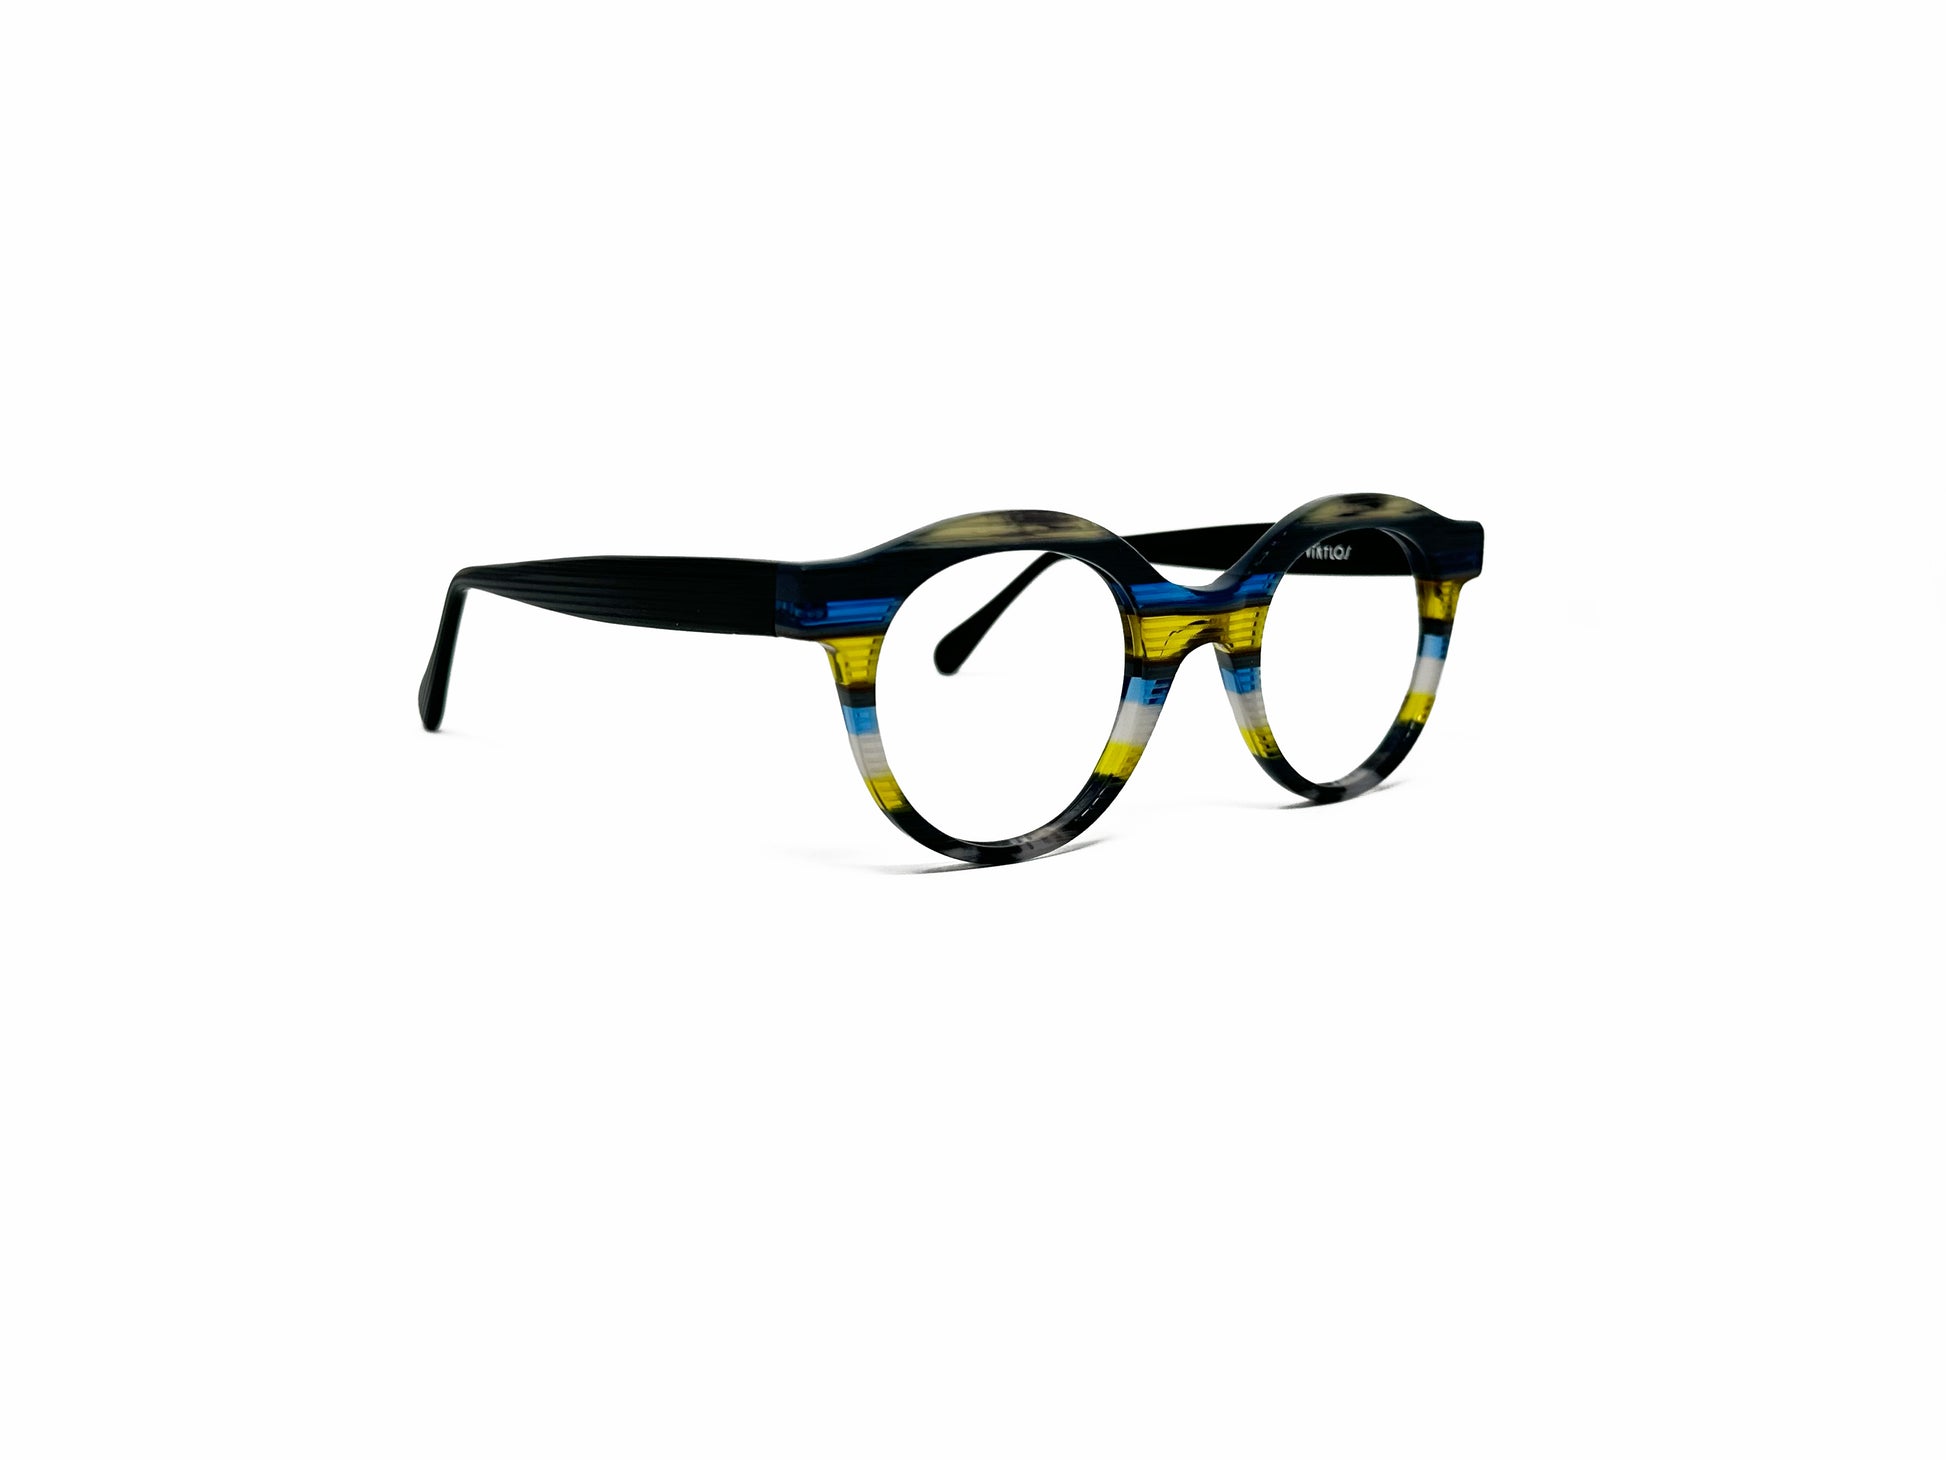 Viktlos round acetate optical frame. Model: 3160. Color: 1778RE85 - Blue, yellow, and clear stripes. Side view.